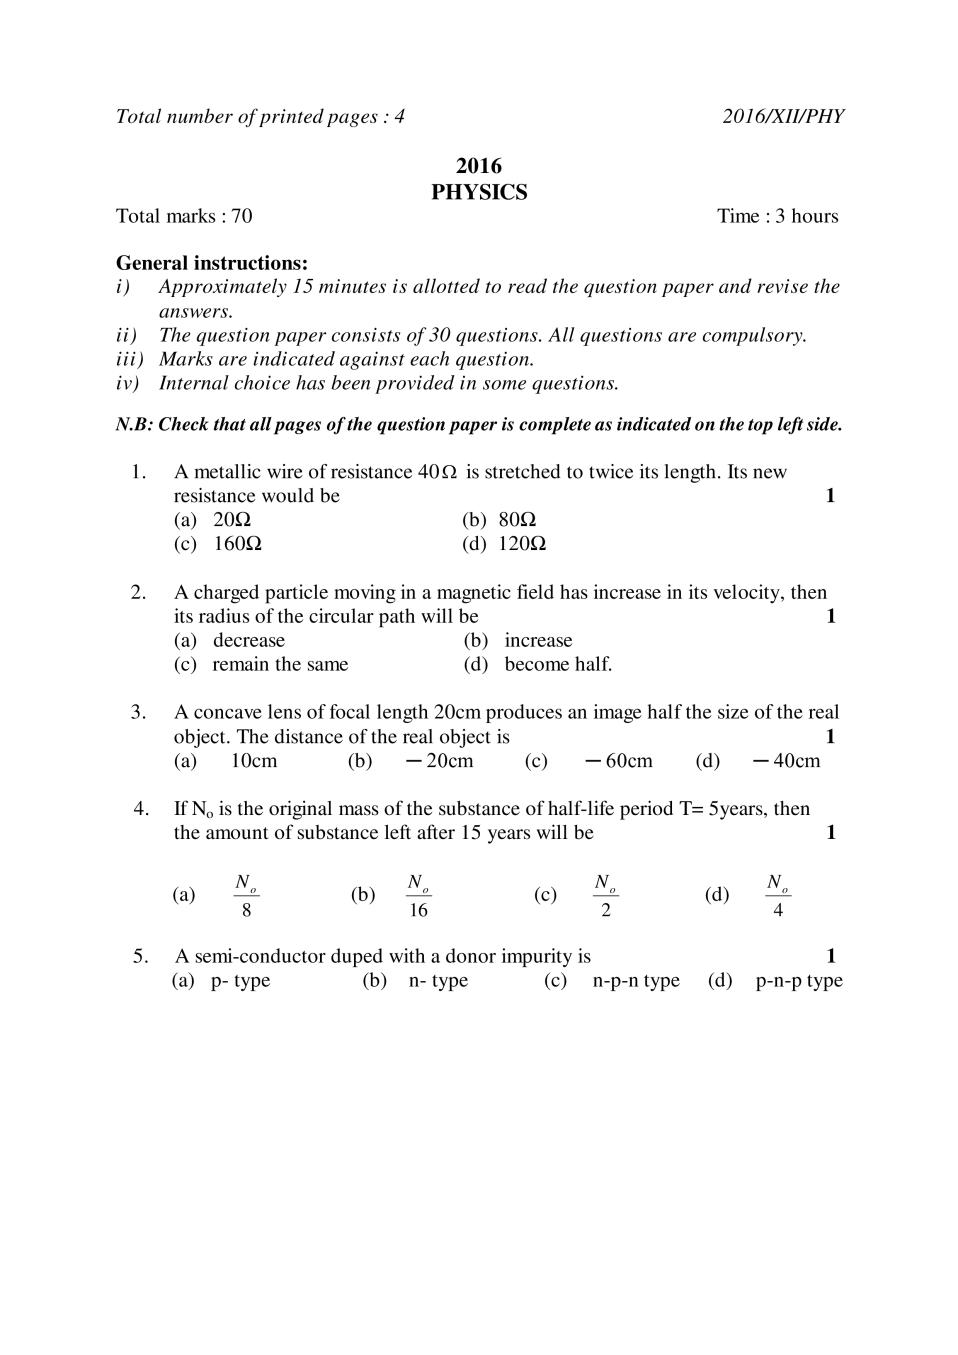 NBSE Class 12 Question Paper 2016 for Physics - Page 1